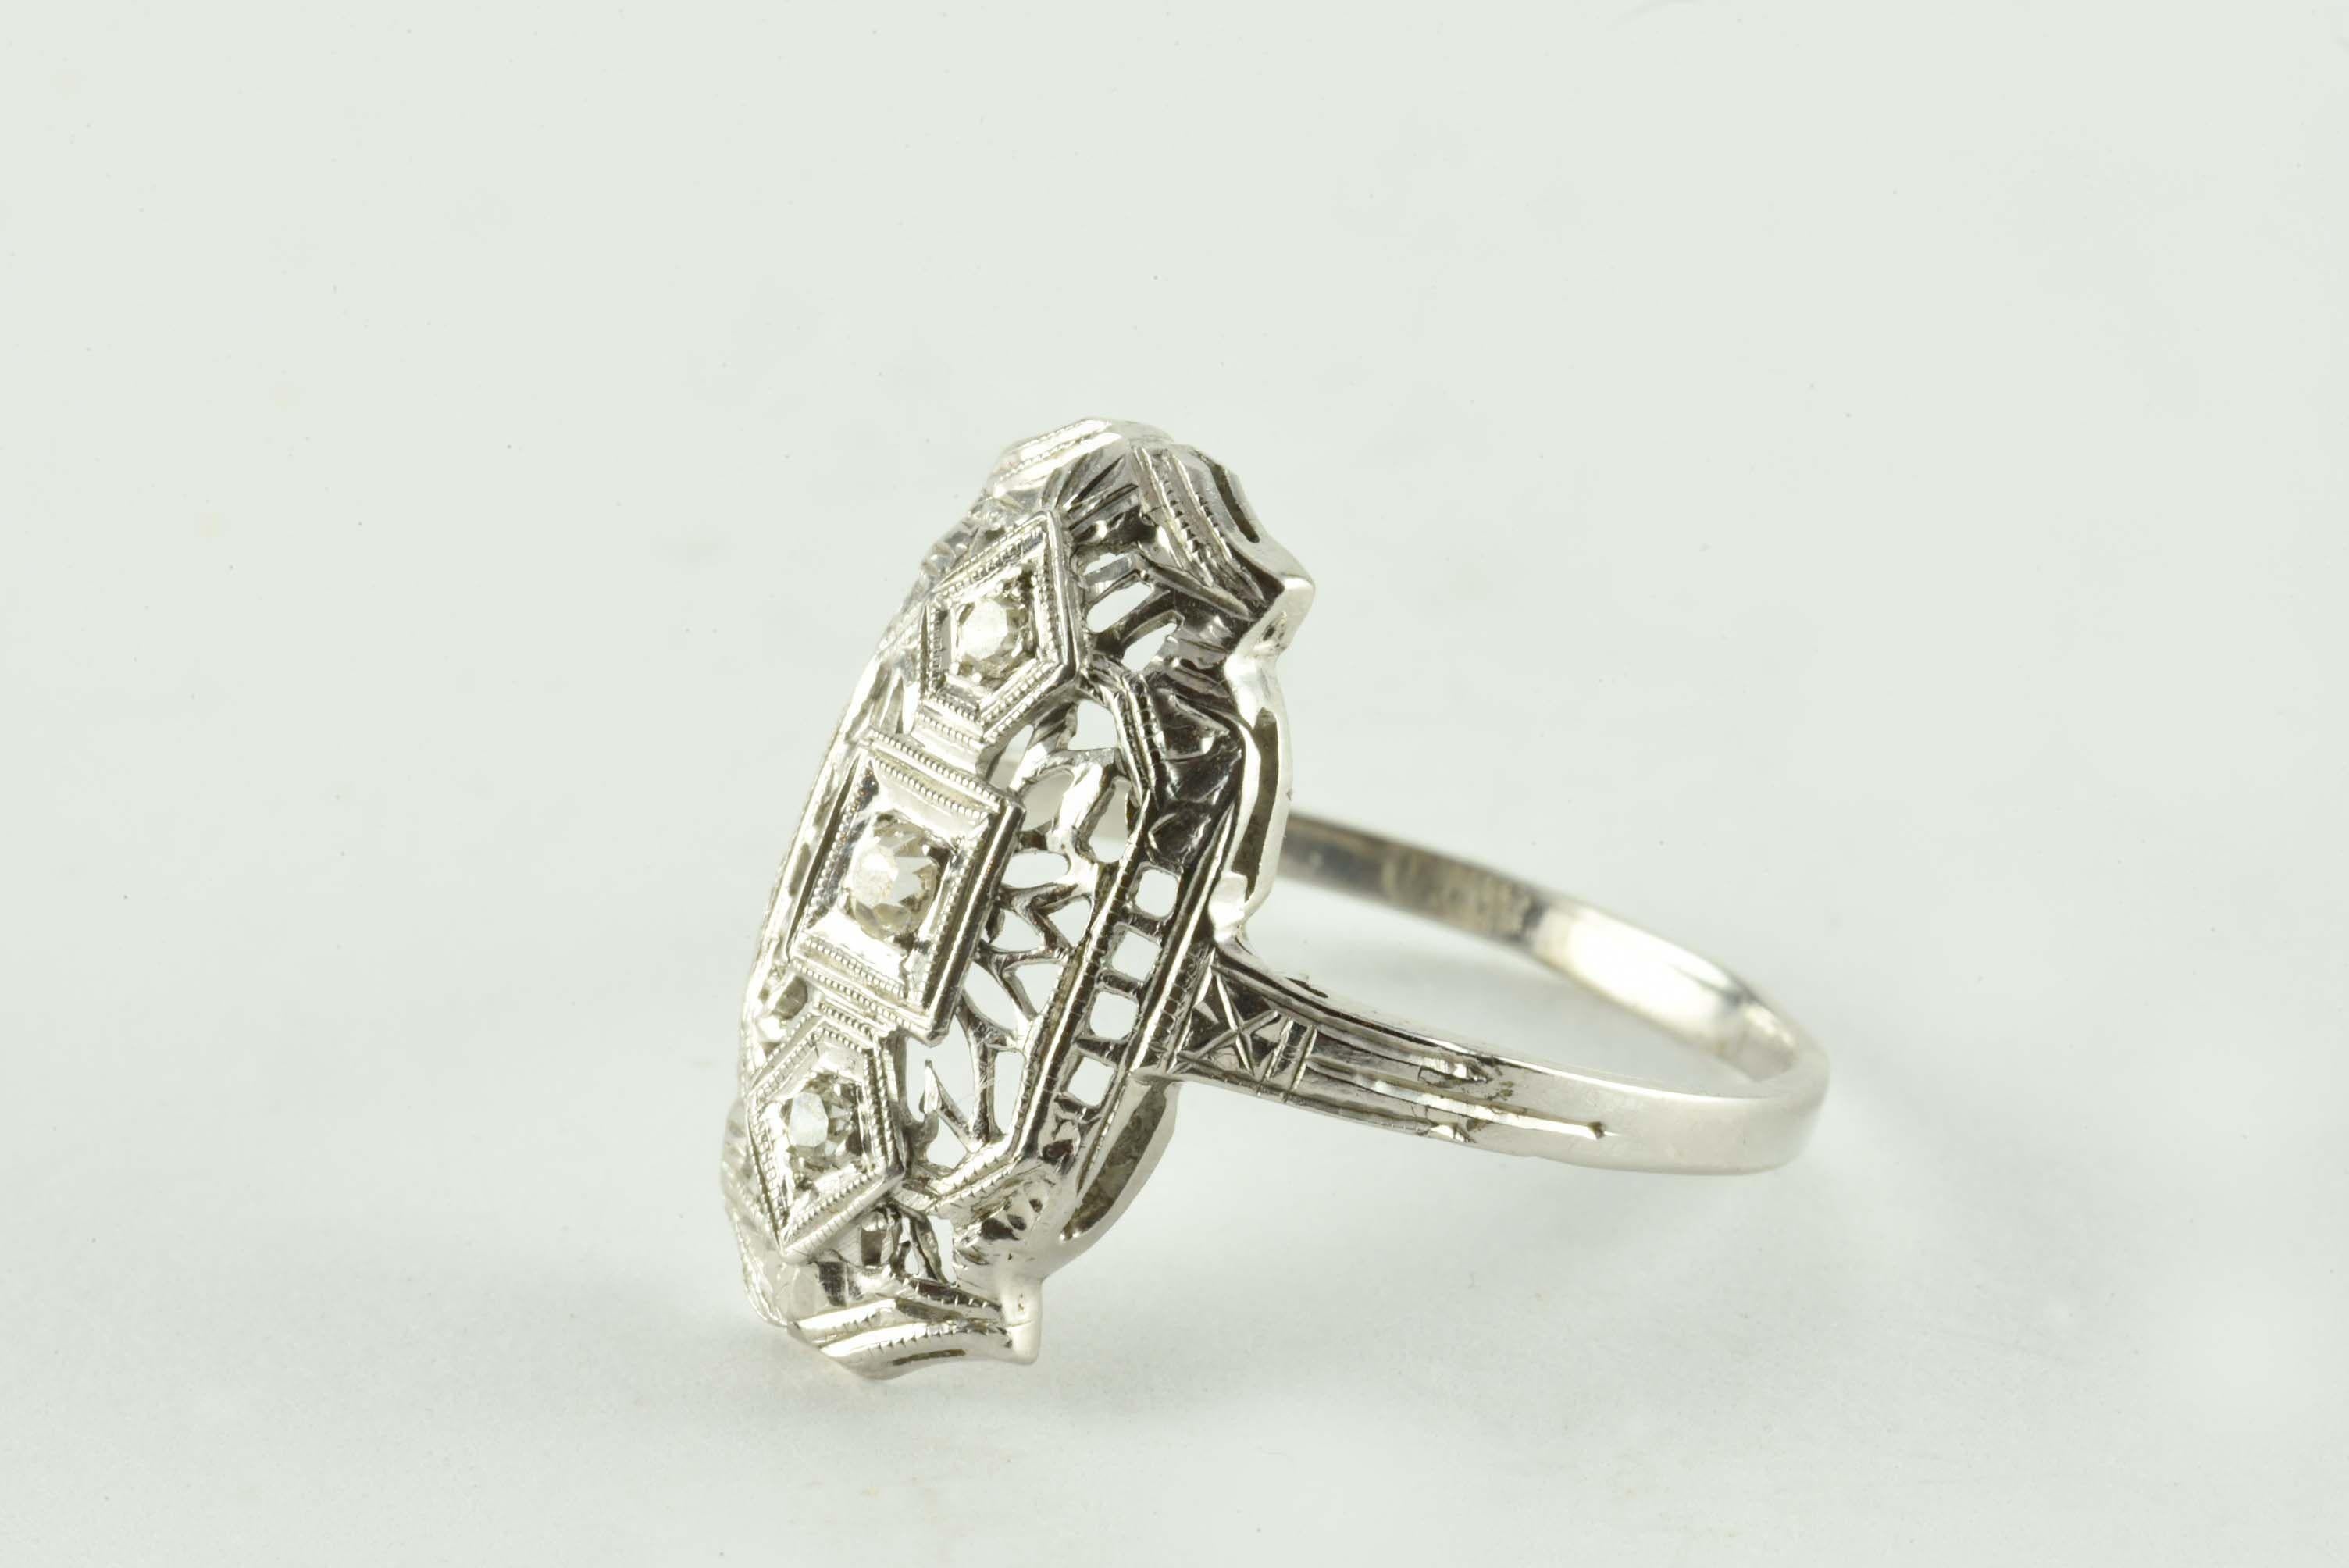 This striking antique band is meticulously crafted from 14kt white gold with fine filigree details and set with a trio of single cut diamonds H-I color, SI clarity, totaling 0.10 carats. 
